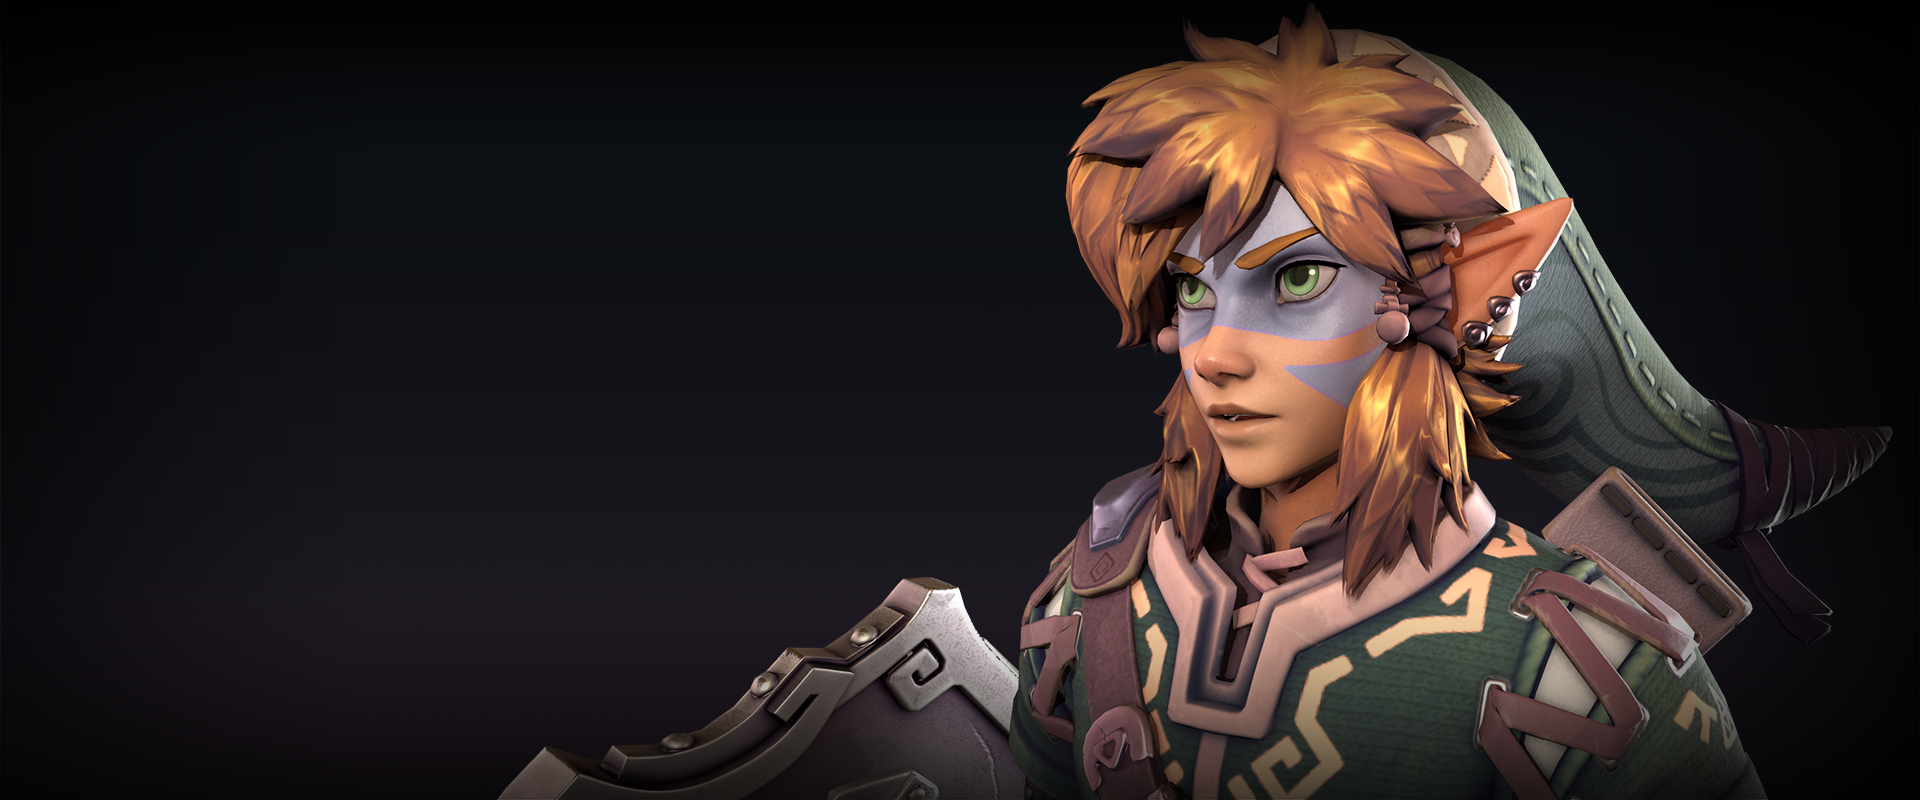 Game Ready Model - Link Tribal